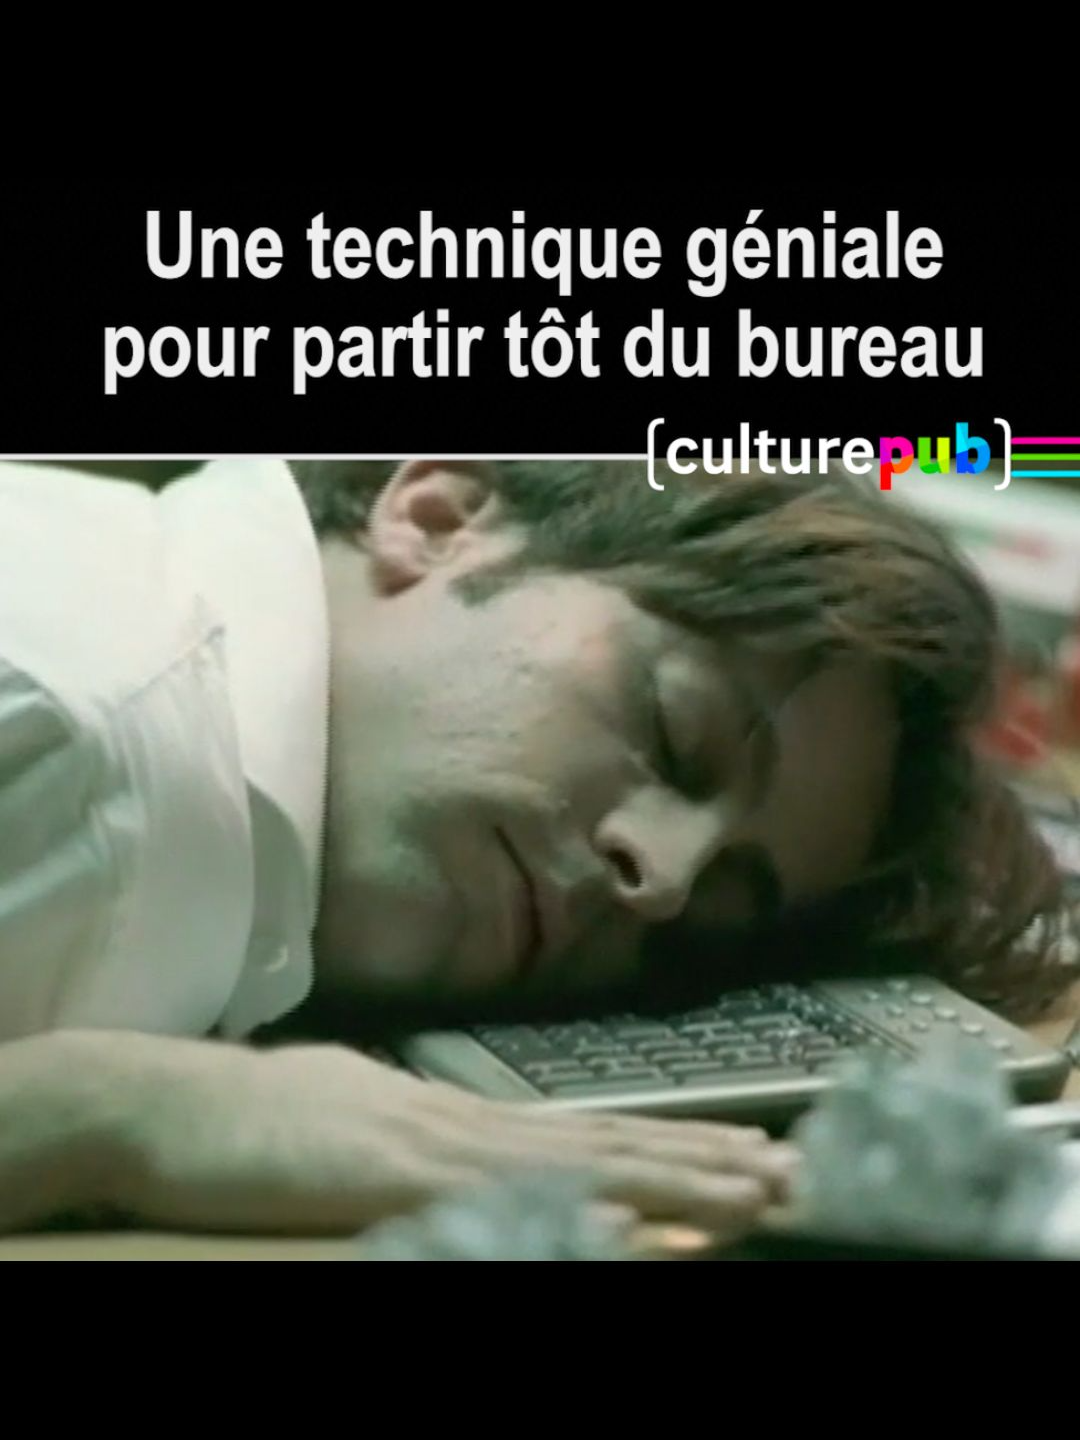 Très efficace ! 🤣🤣 #job #work #office #bye #tips #funny #video #world #best #vintage #classic#ad #portugal #commercial #foryou #pub #pourtoi #culturepub #france #media